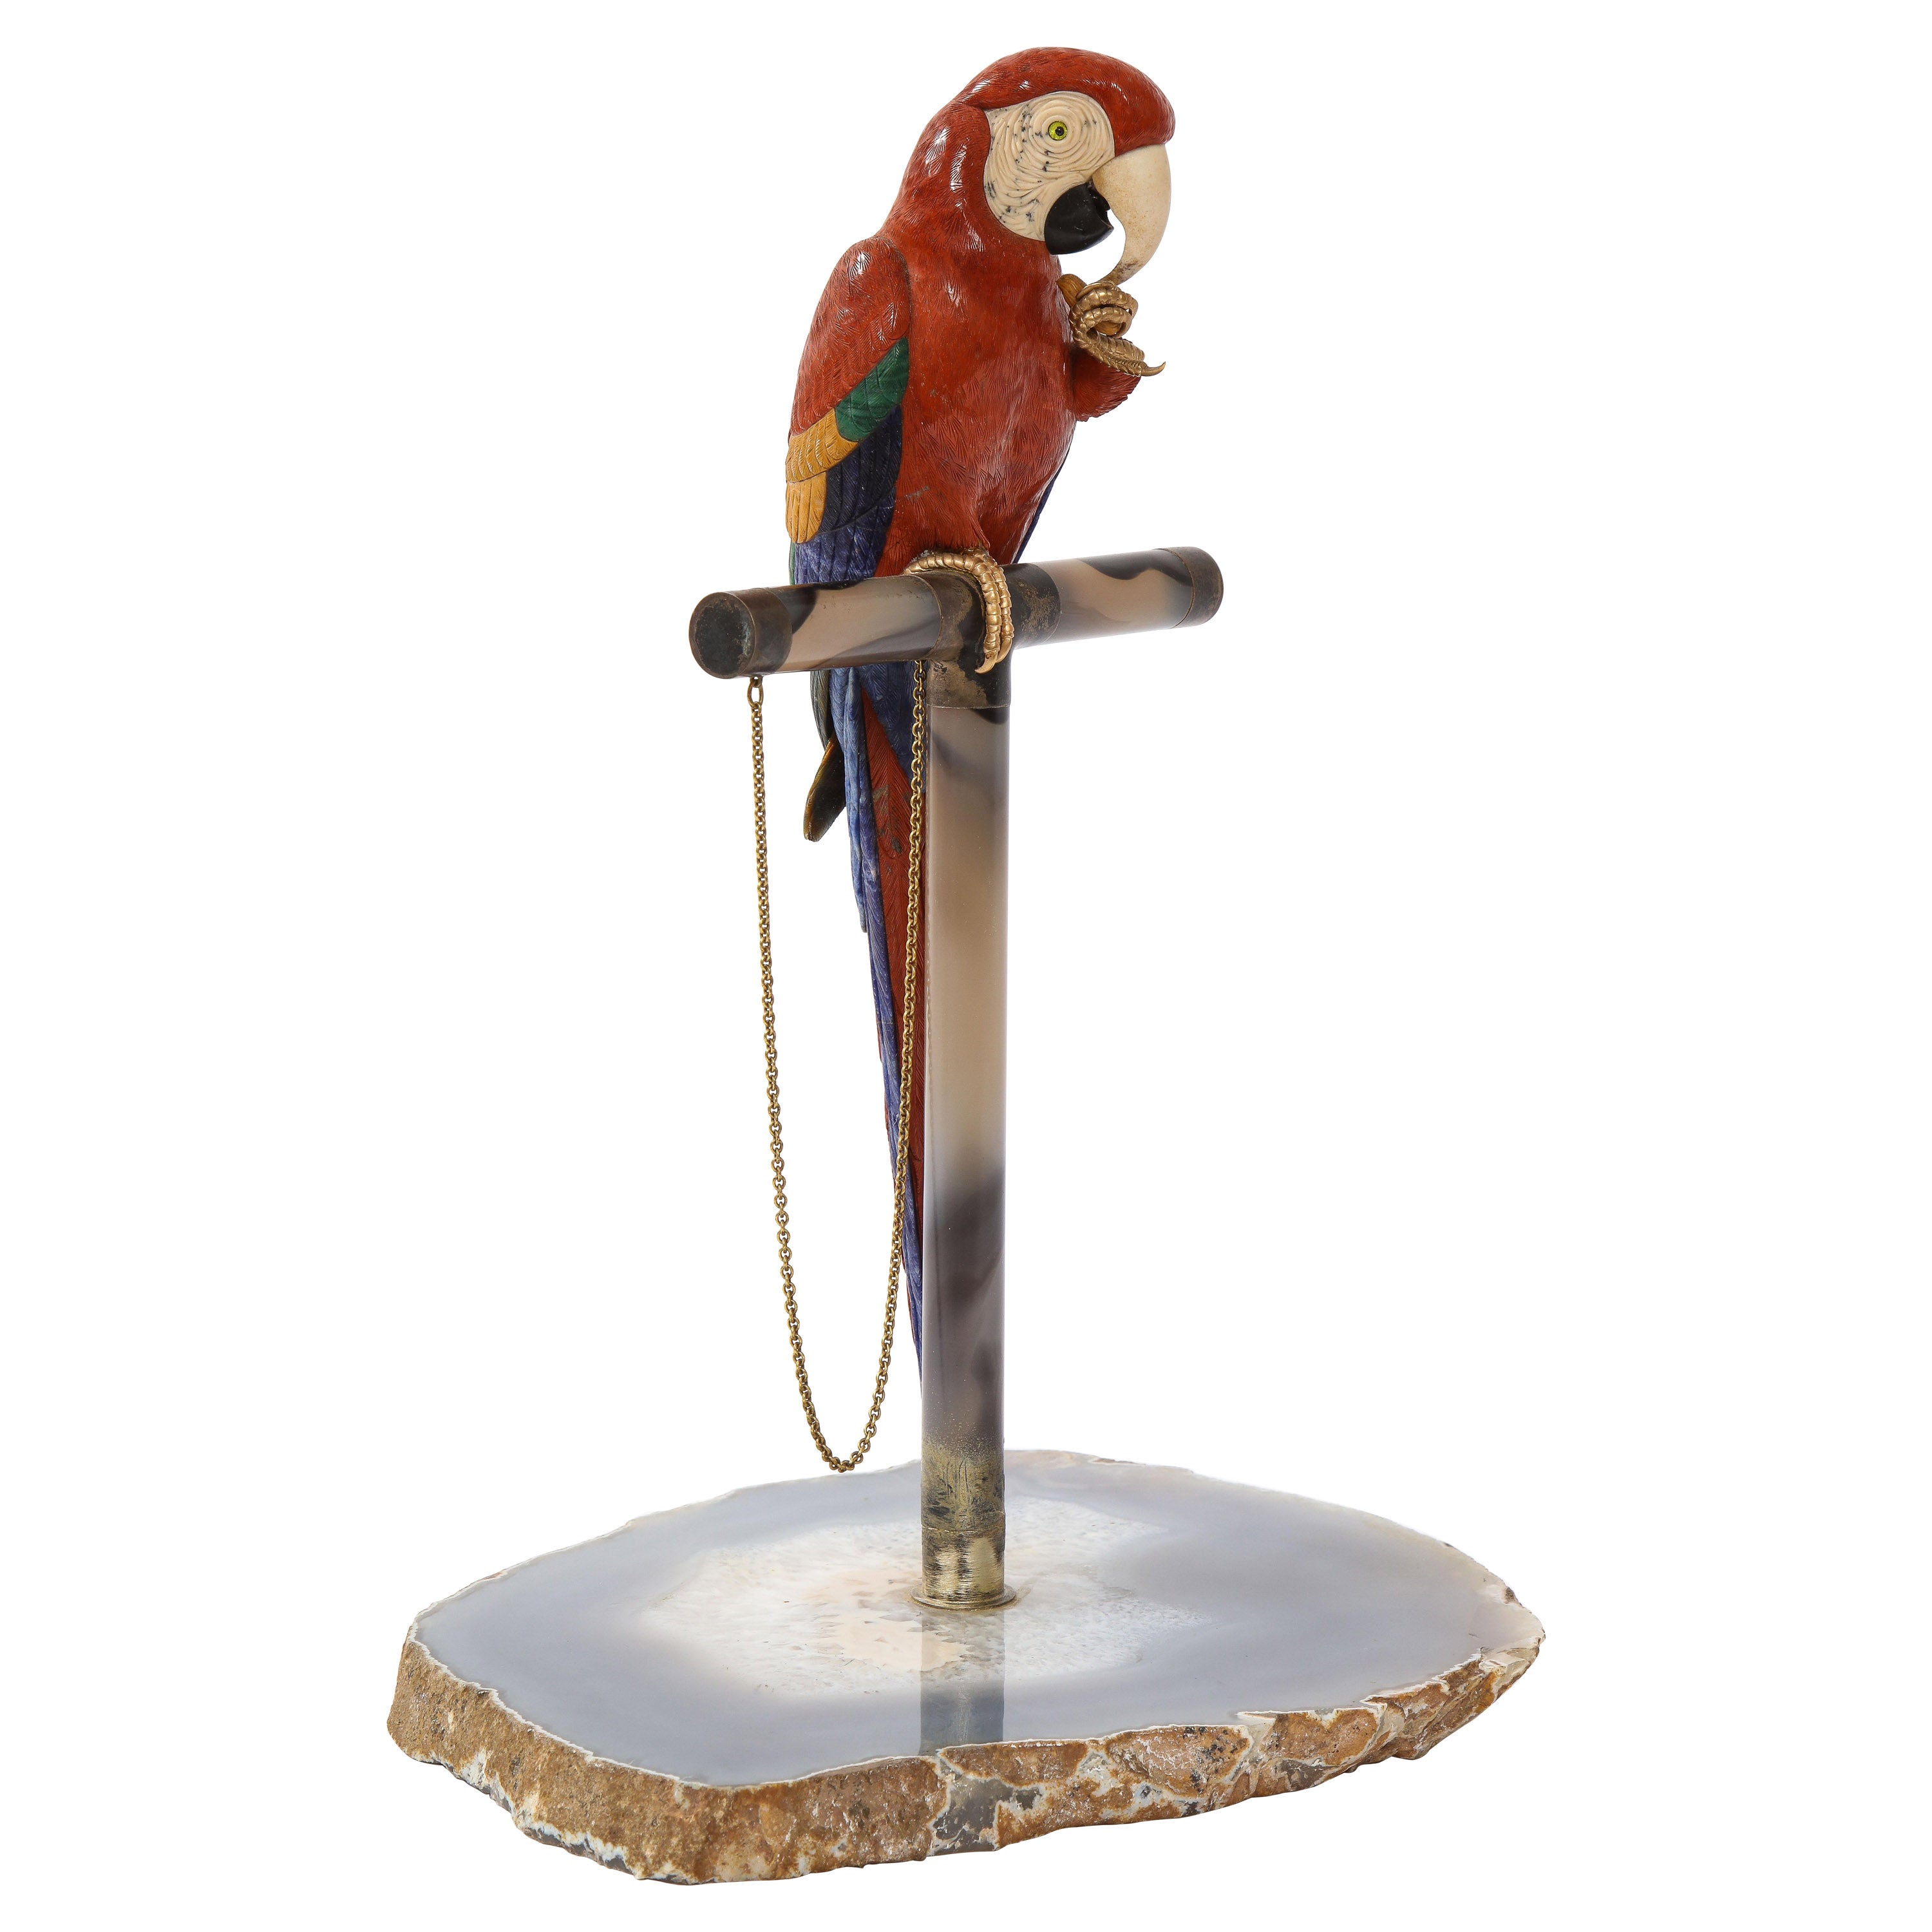 Semi Precious Stone & Metal Model of a Scarlet Macaw Parrot, P. Müller, Swiss